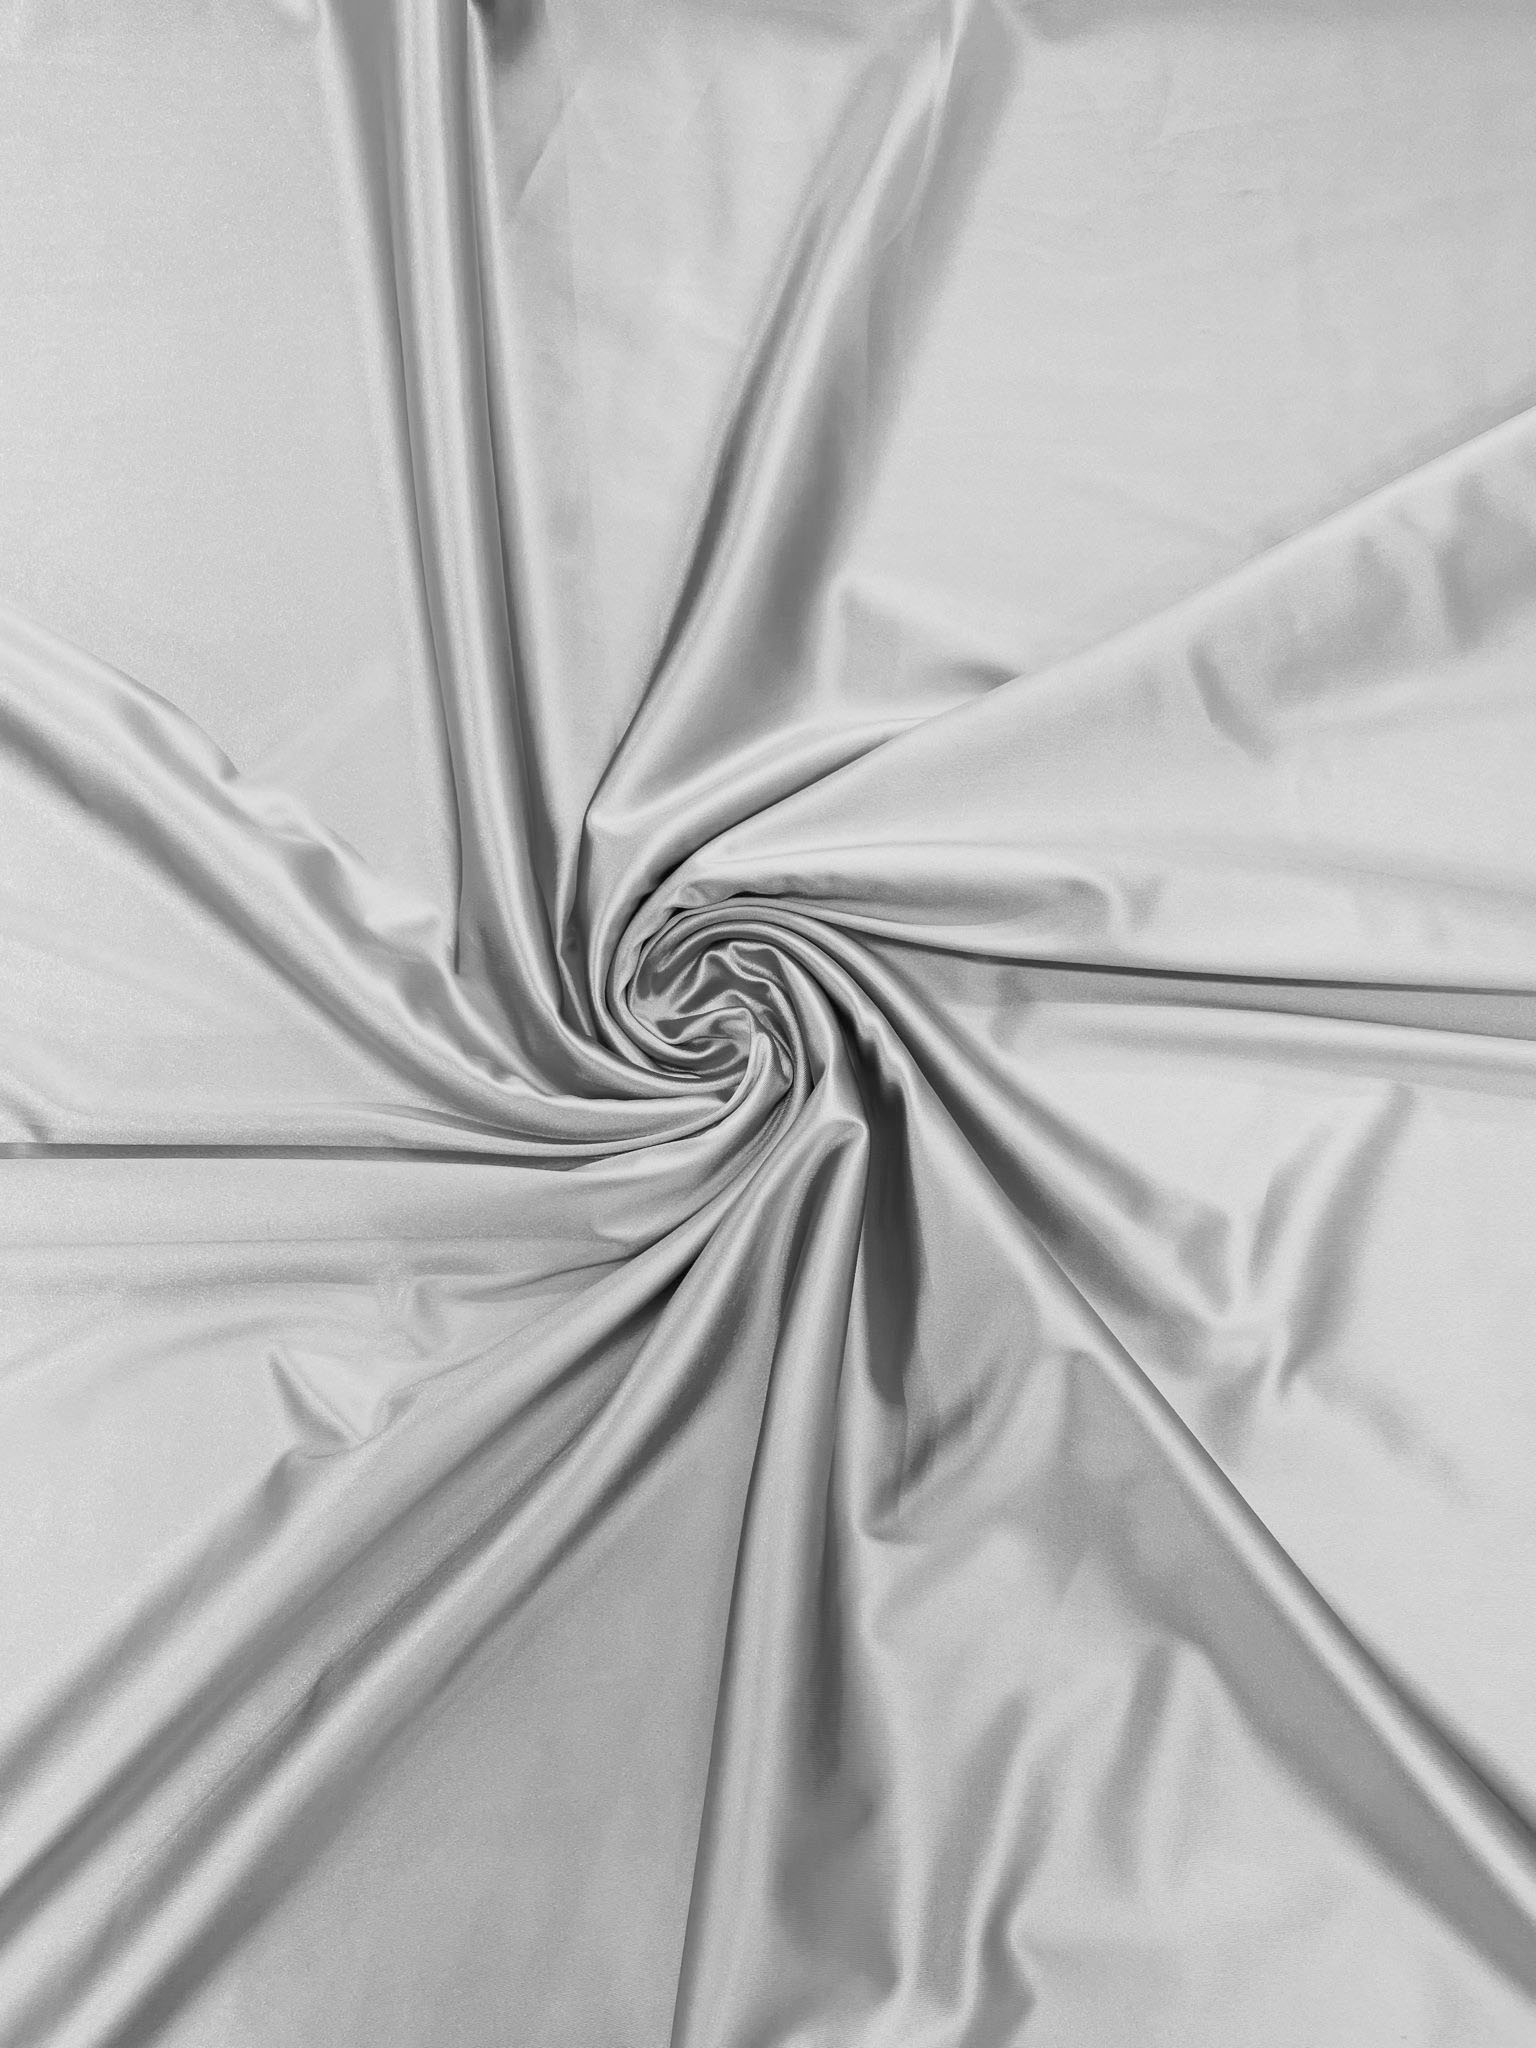 Off White Heavy Shiny Satin Stretch Spandex Fabric/58 Inches Wide/Prom/Wedding/Cosplays.